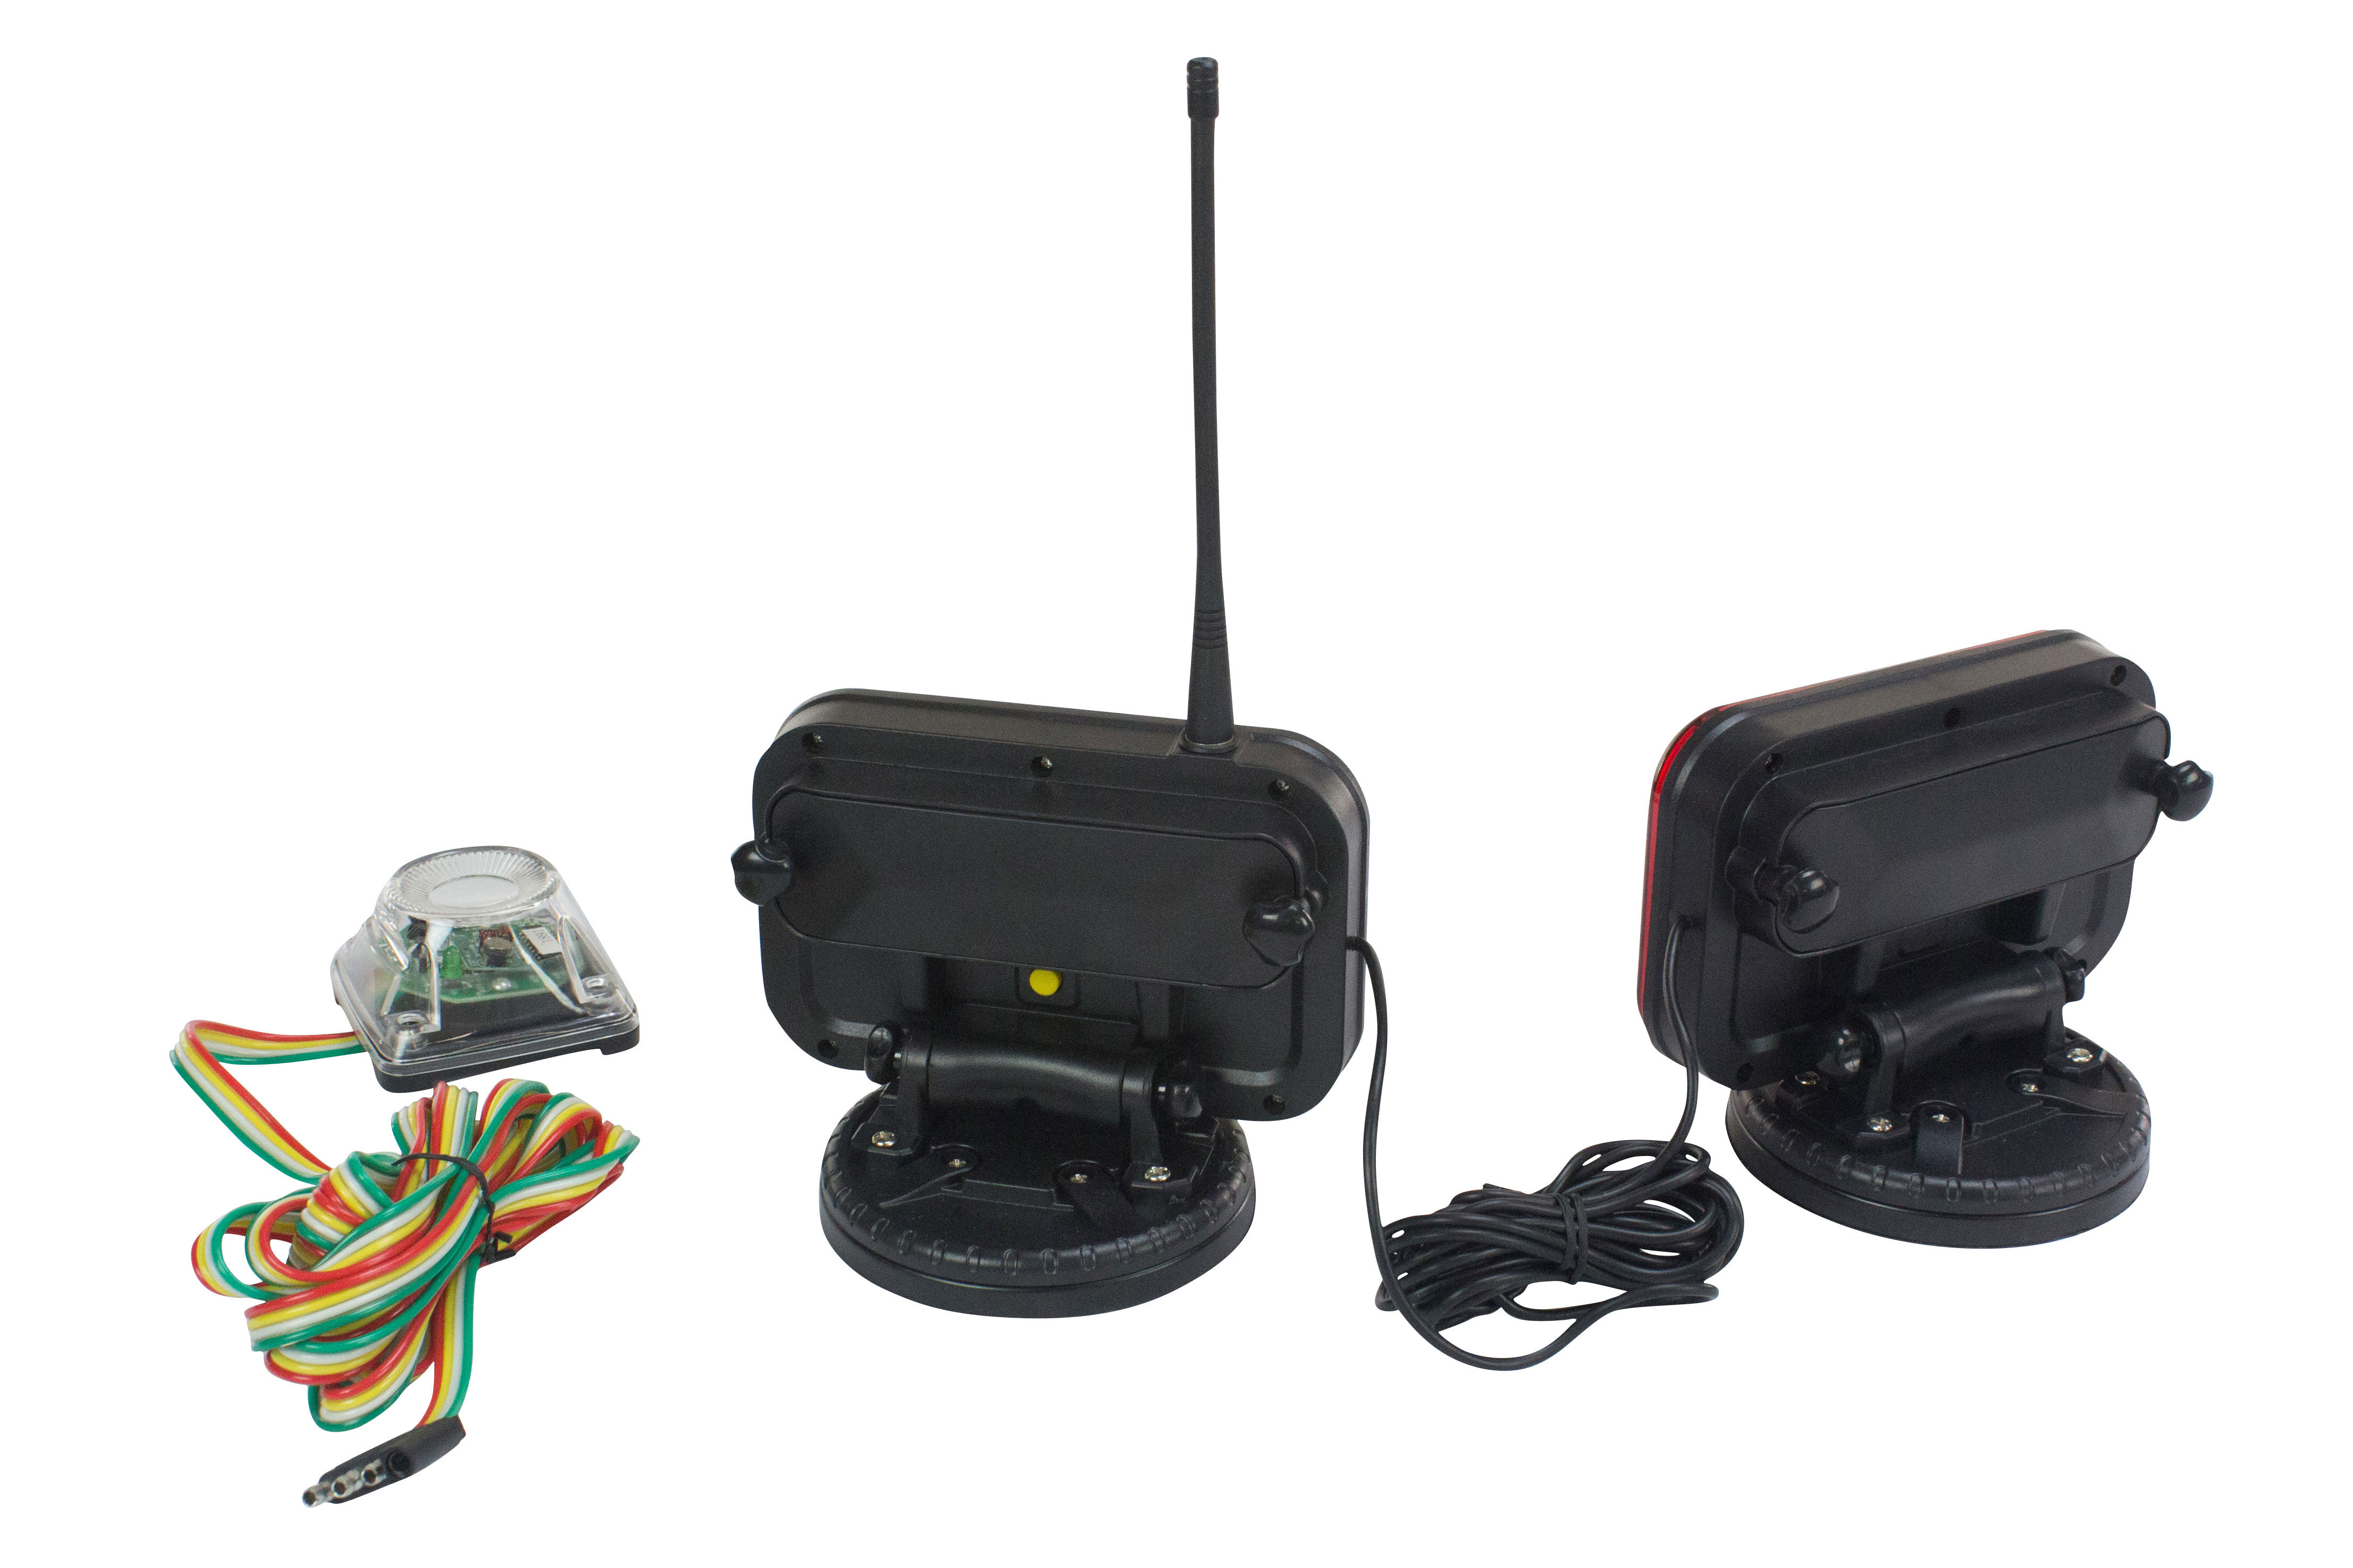 Wireless LED Tow Lights that Operate on Four AA Batteries